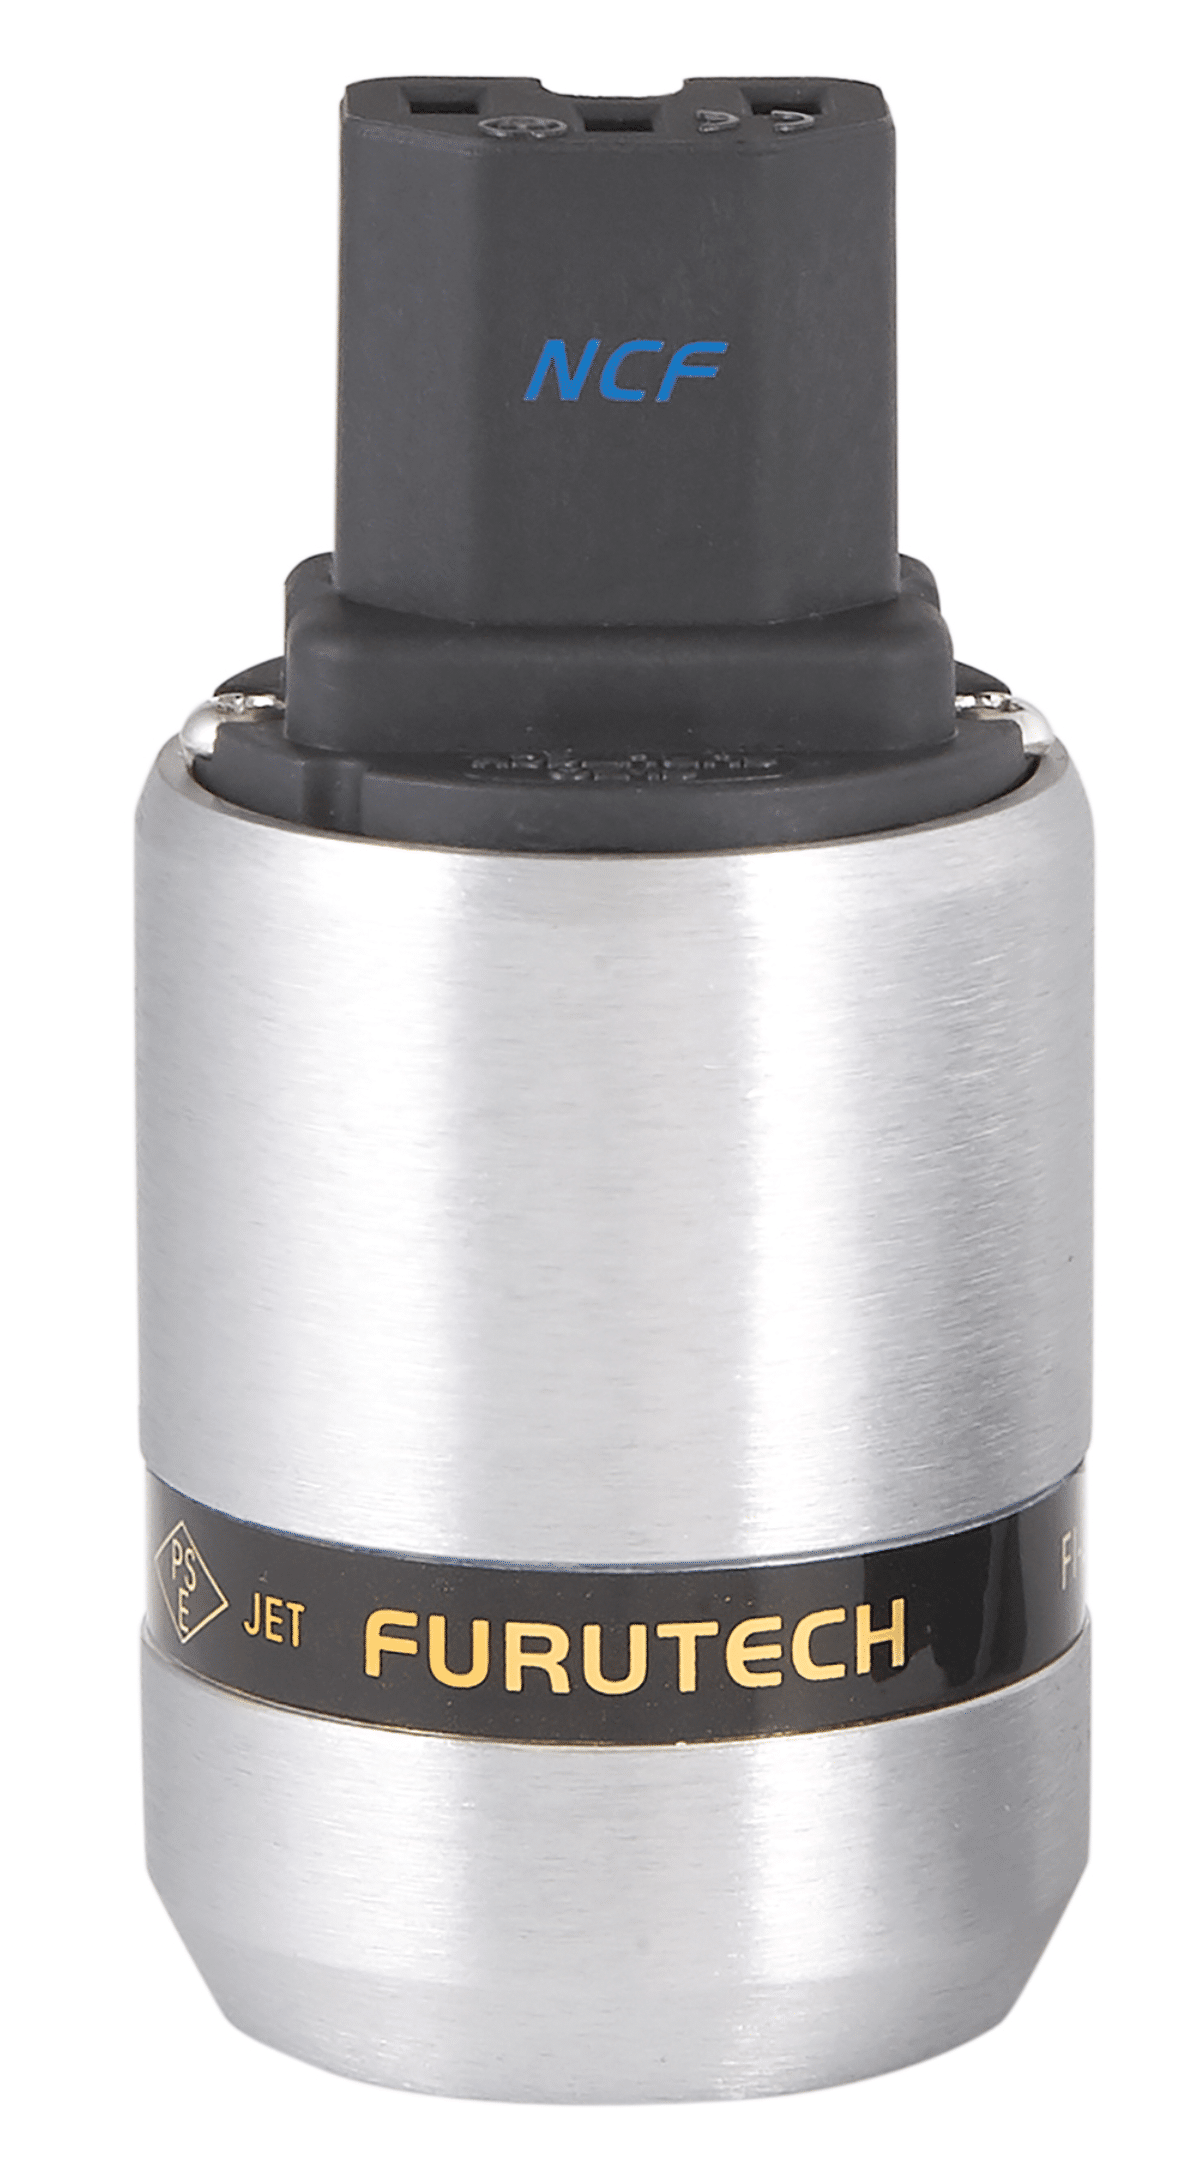 IEC power connectors from Furutech